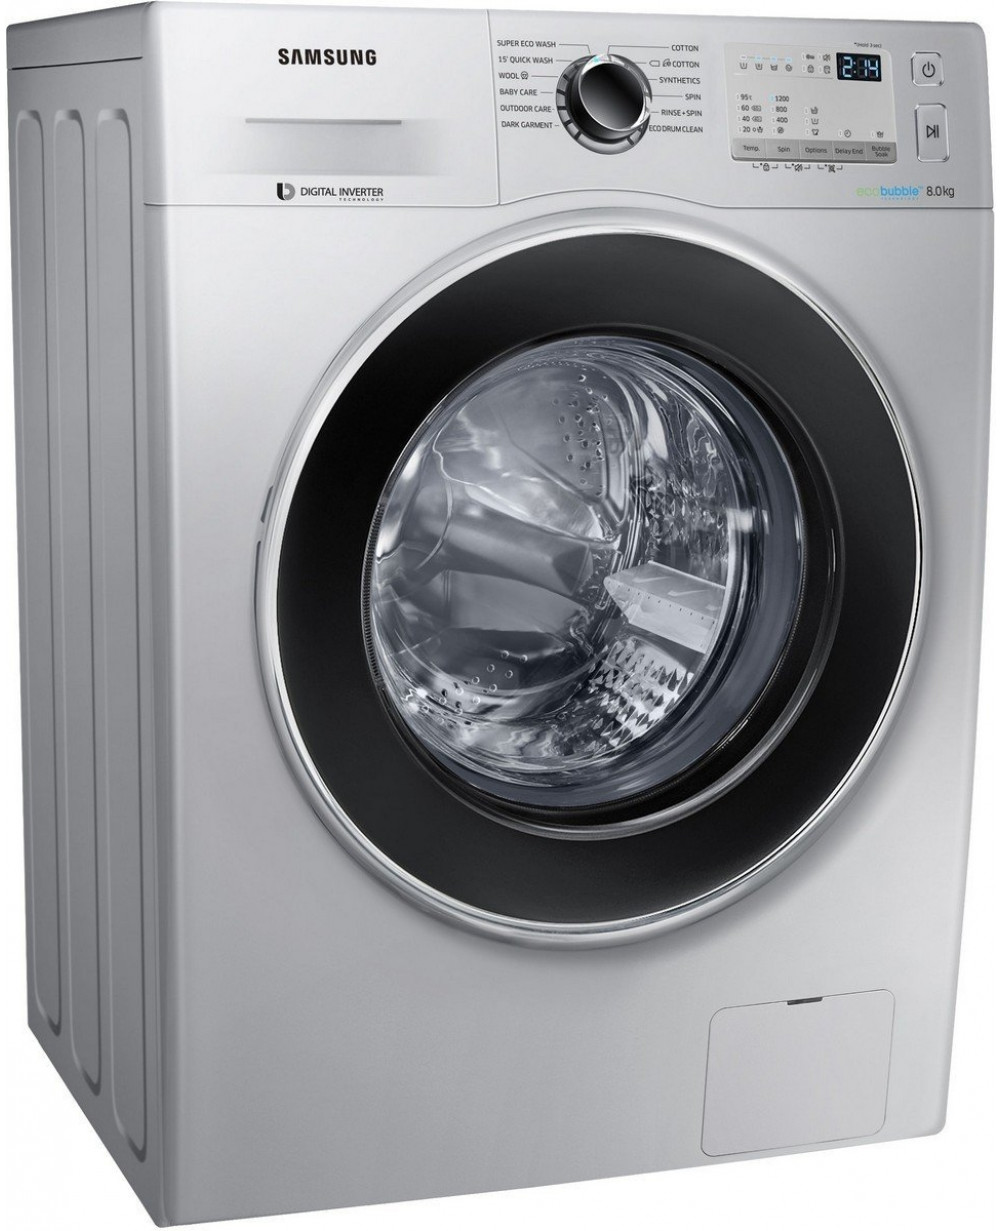 Samsung Fully Automatic Front Loading Washing Machine With ...